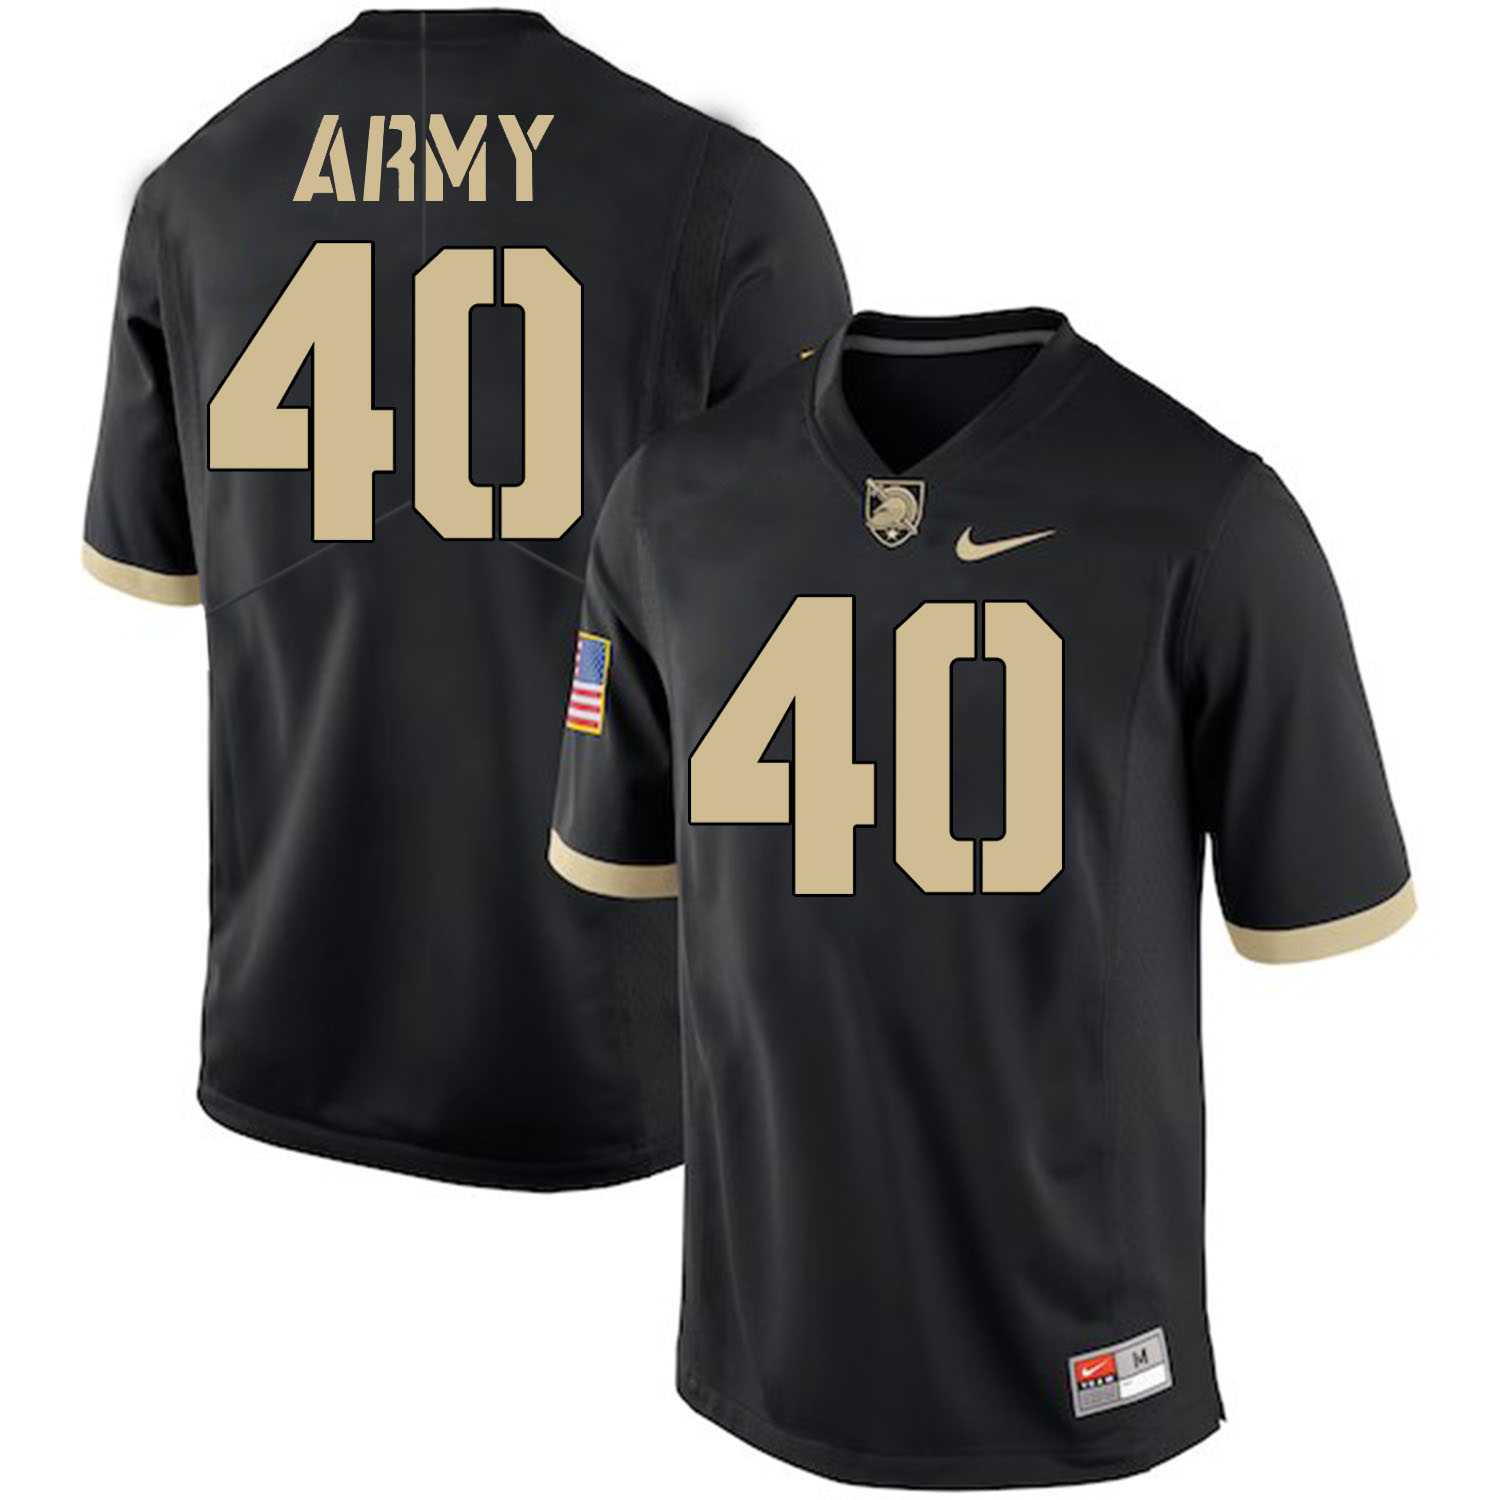 Army Black Knights #40 Andy Davidson Black College Football Jersey